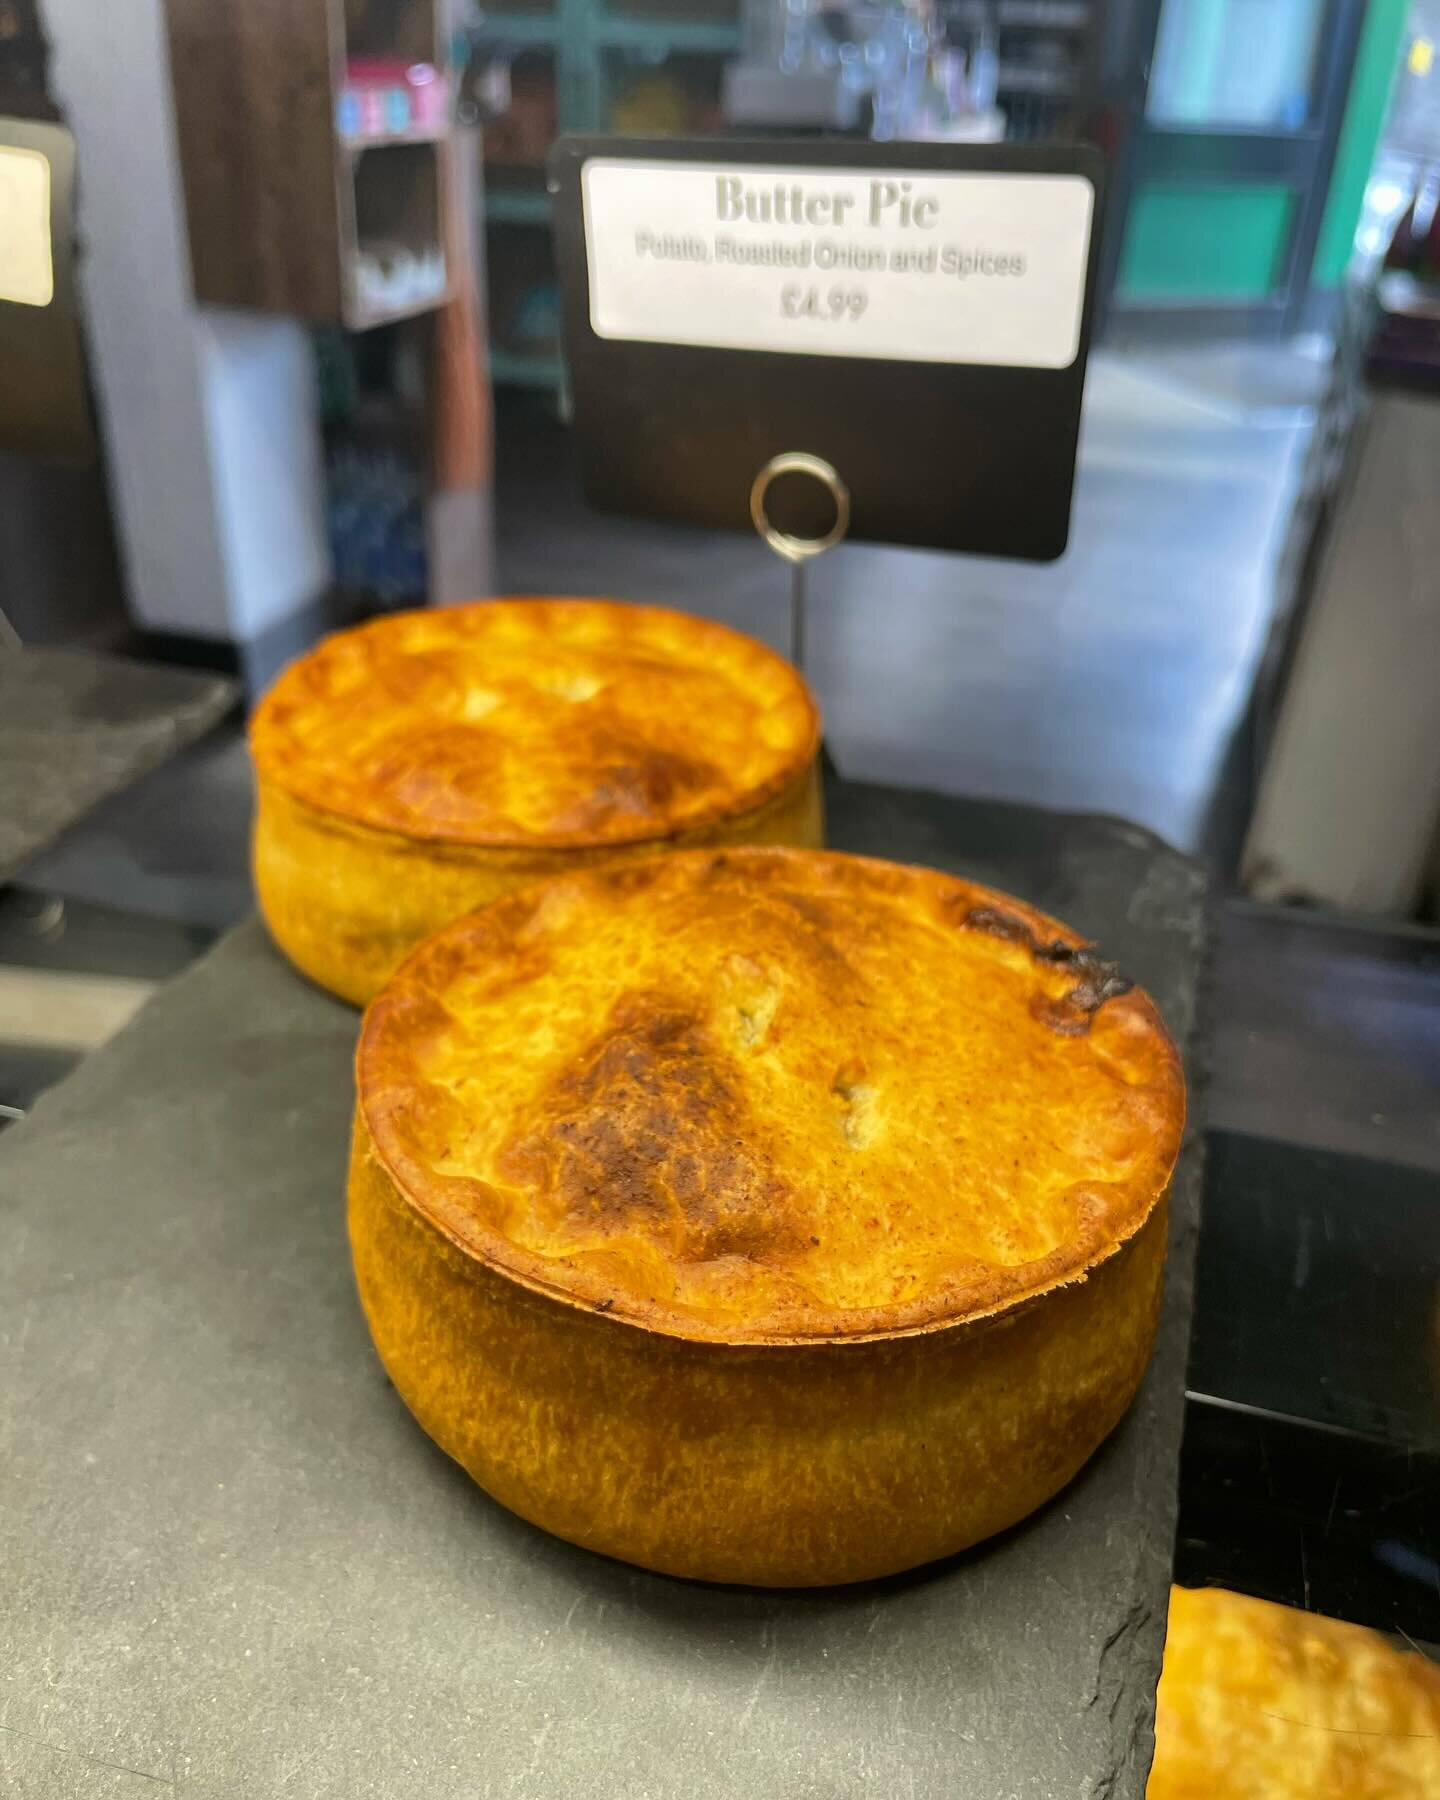 🥧🥧🥧 The Butter Pie is back 🥧🥧🥧 
If you like Potatoes 🥔 Caramelised Onion 🧅 Double Cream &amp; Spices then this is the pie for you 🍴🍴🍴
#guesswhosback 
.
.
.
.
.
.
.
.
.
.
.
.
.
.
.
.
#pie #food #foodie #northernpie #local #rattleghylldeli #